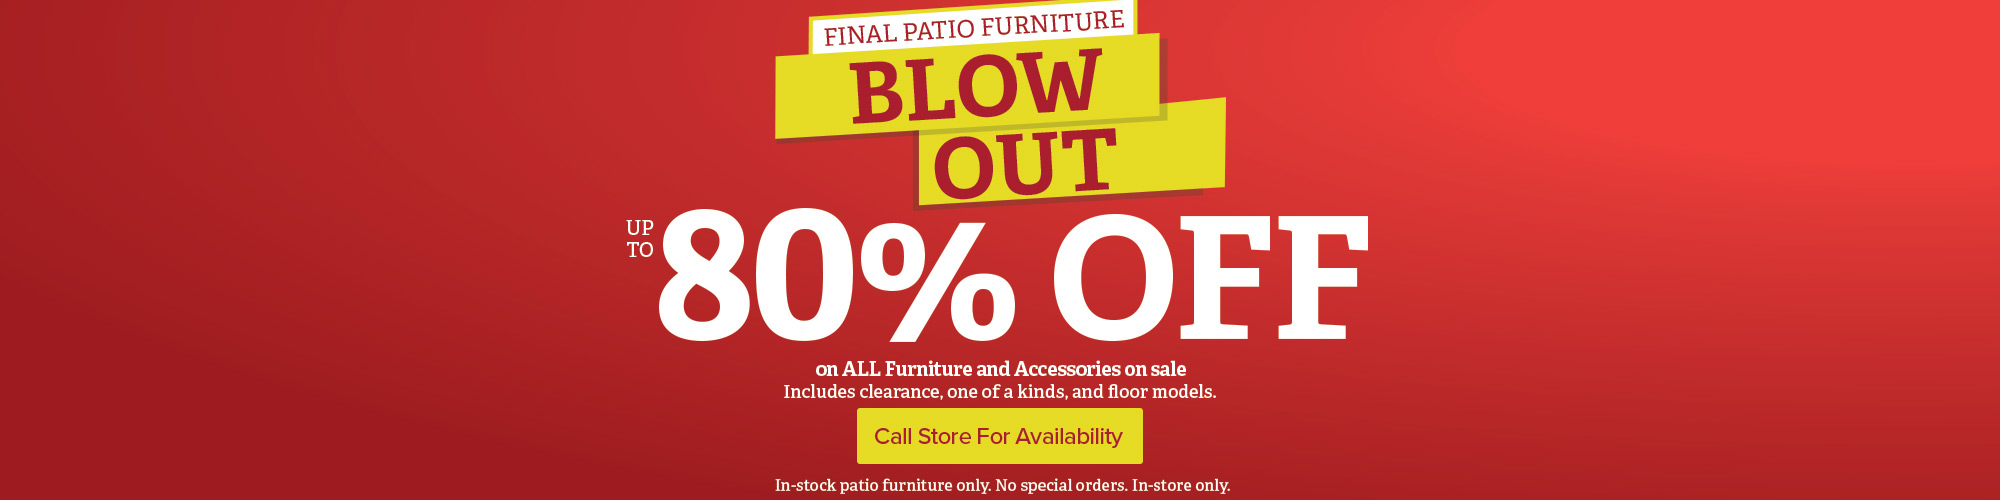 Final Patio Furniture Blow Out. Save up to 80% Off all furniture and accessories on sale. Includes clearance, one of a kind, and floor models. 